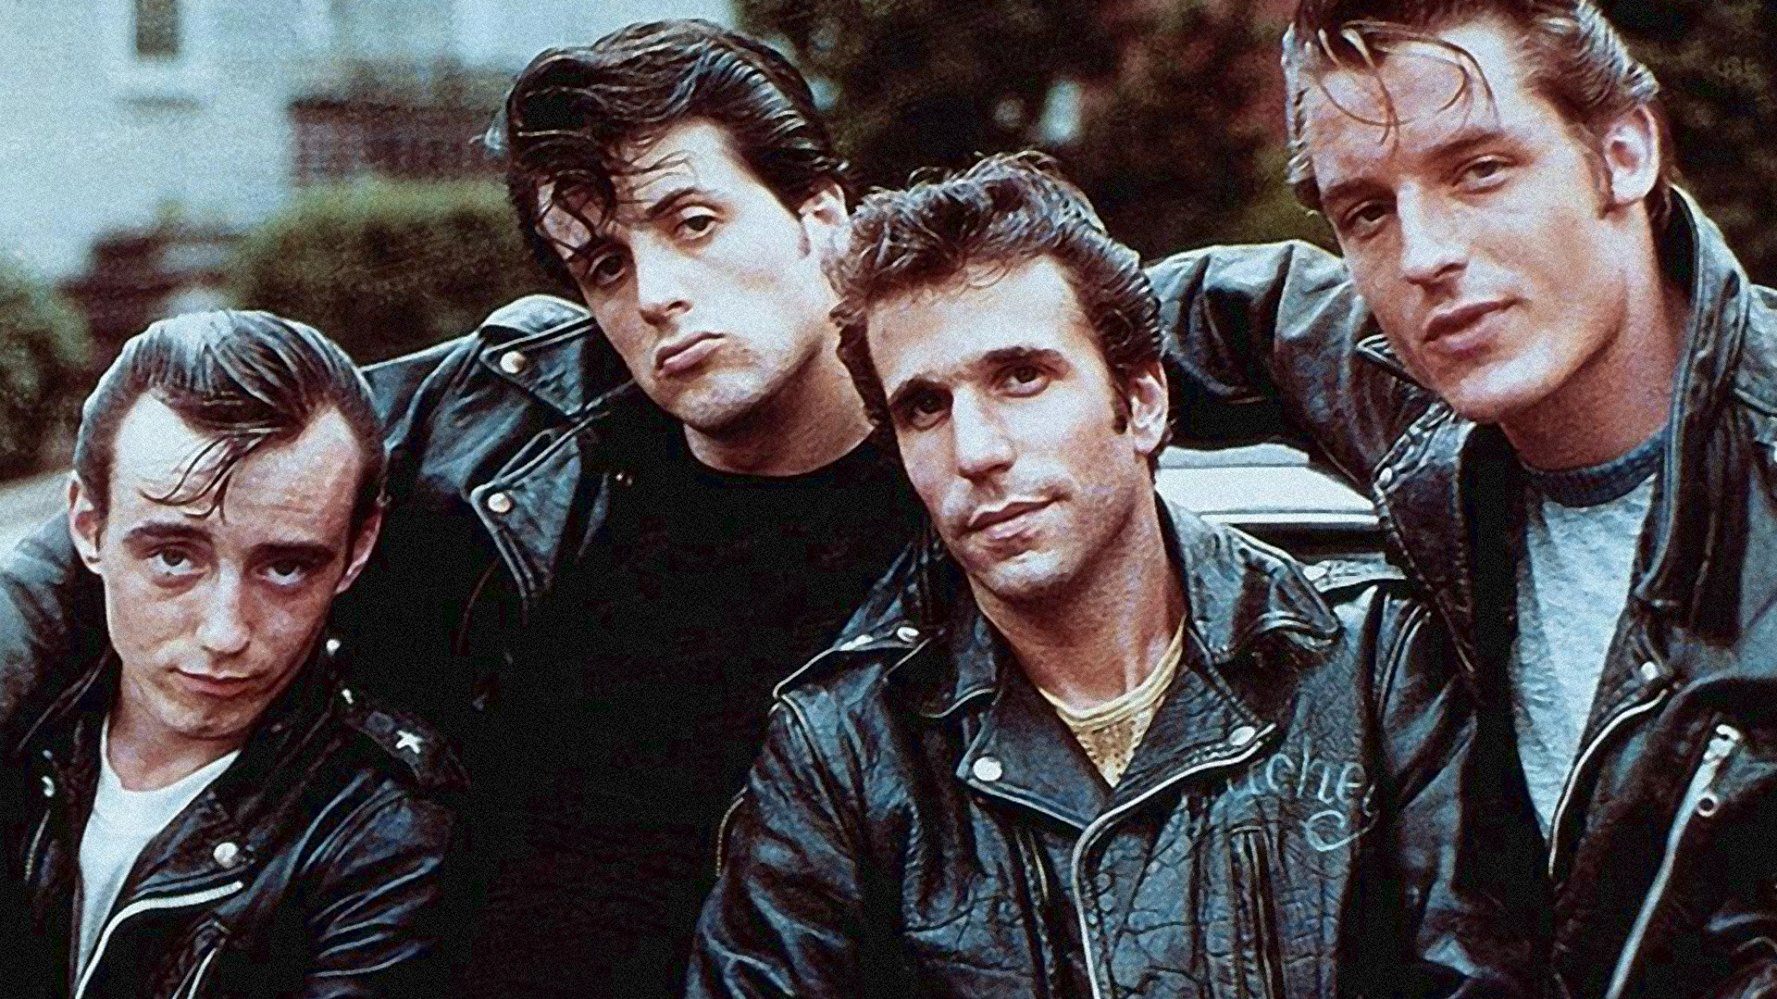 Paul Mace, Sylvester Stallone, Henry Winkler, and Perry King in The Lords of Flatbush